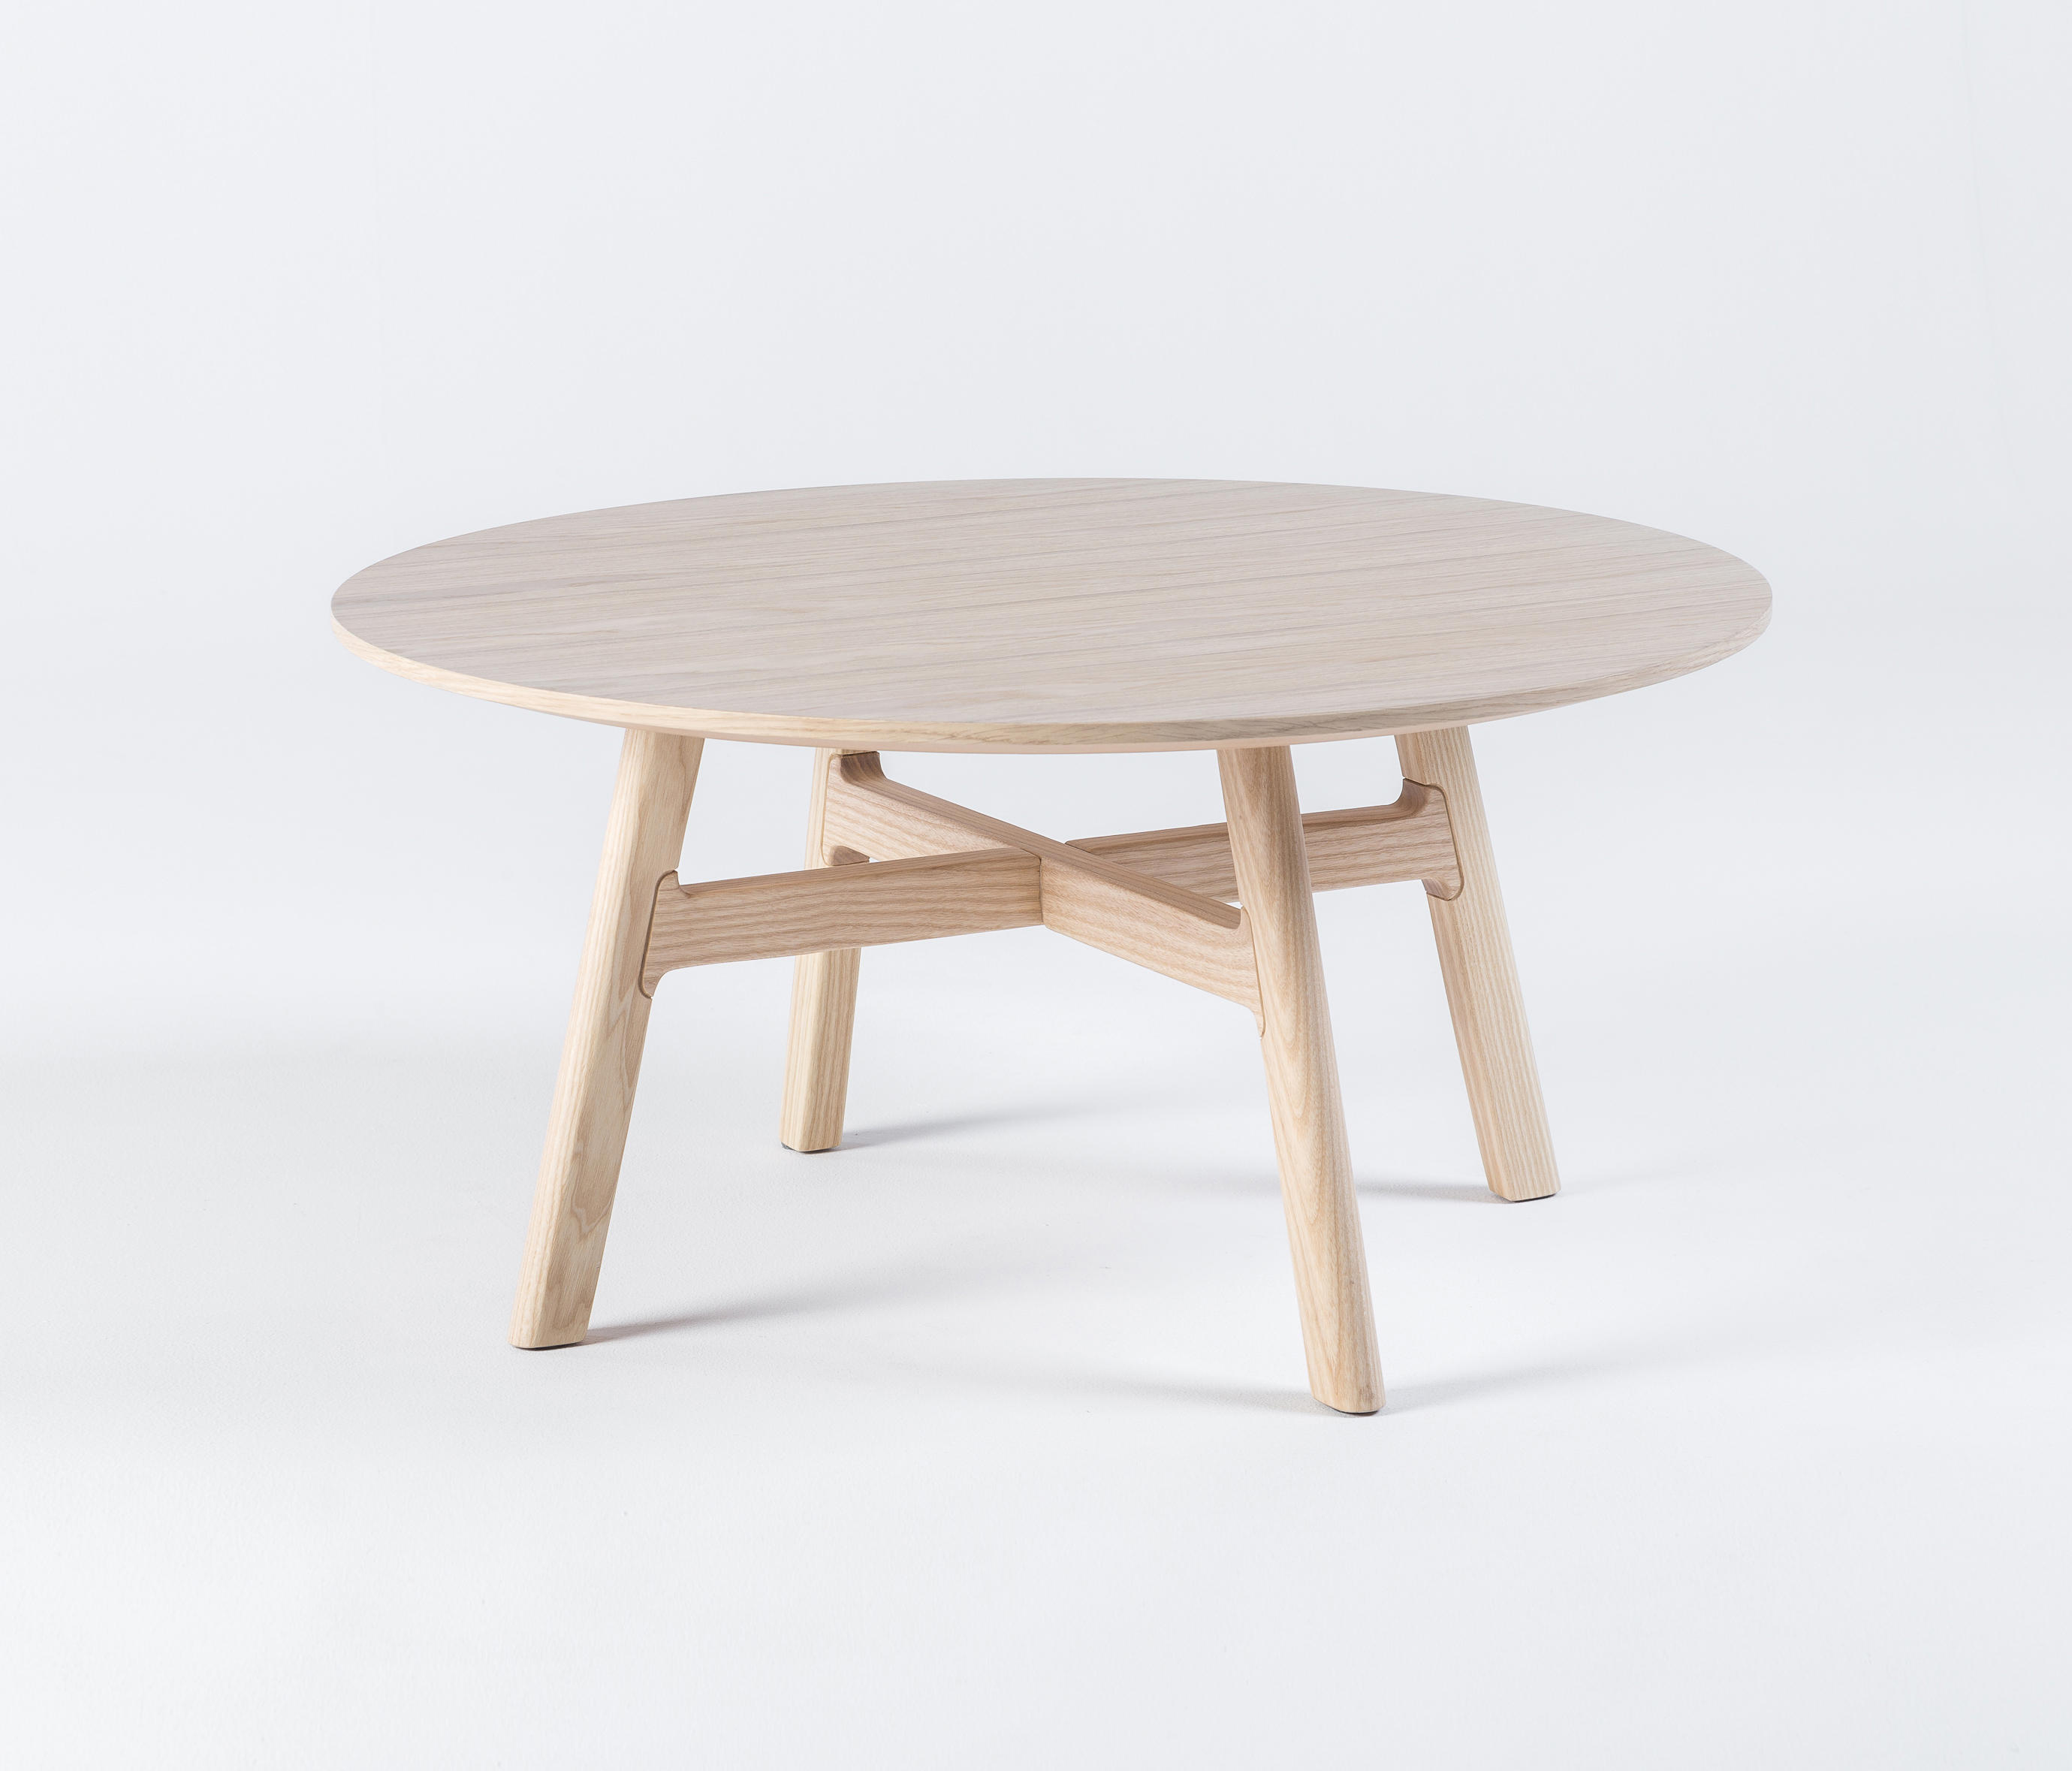 MISHELL - Coffee tables from NOTI | Architonic